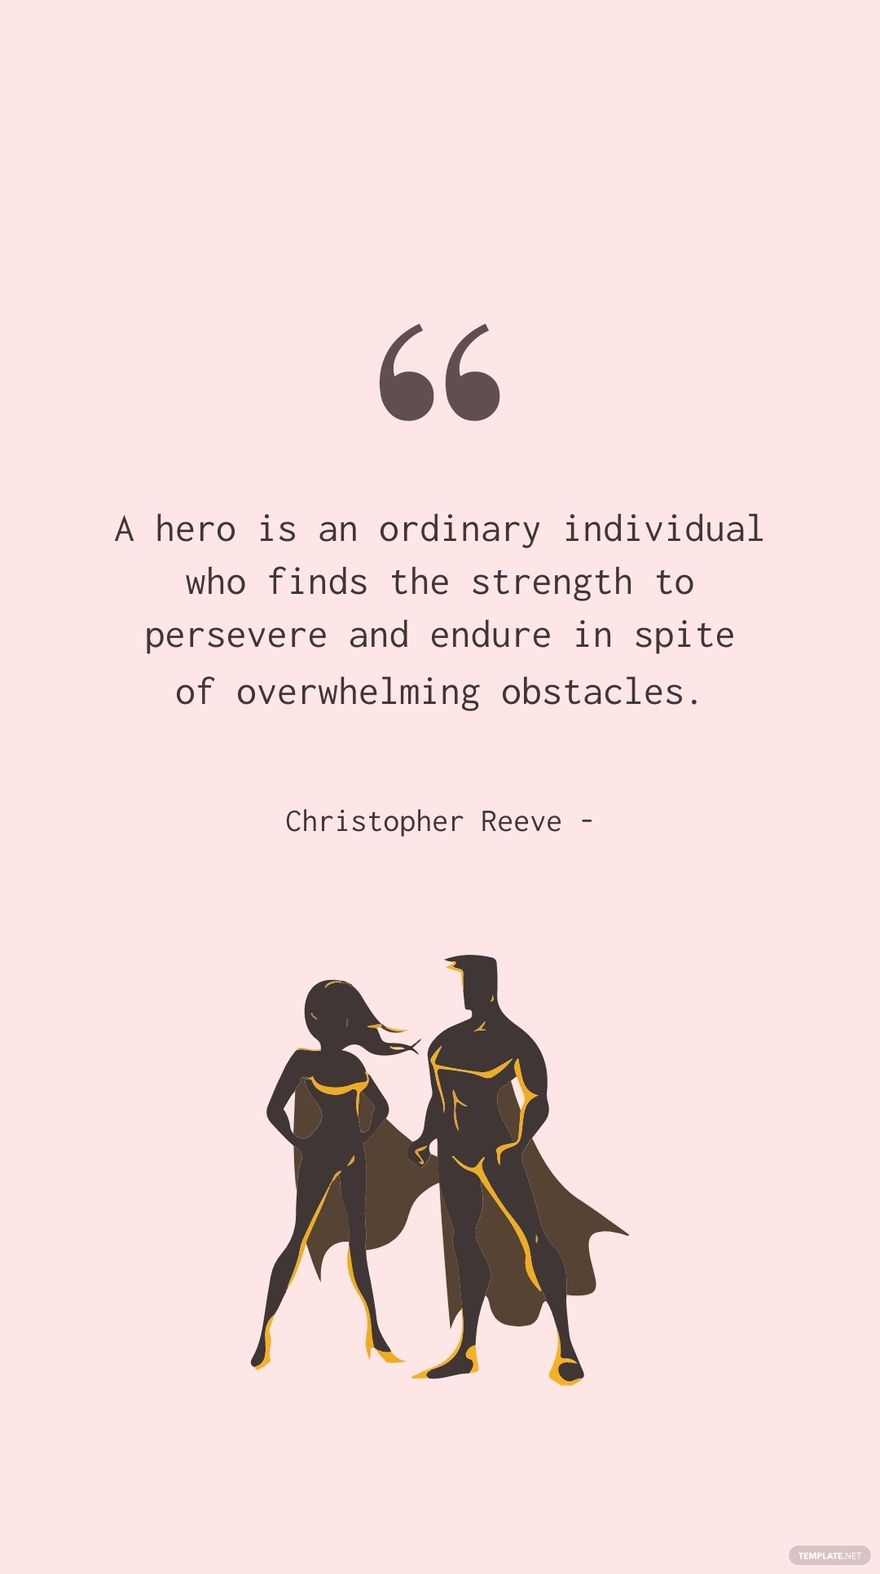 Free Christopher Reeve - A hero is an ordinary individual who finds the strength to persevere and endure in spite of overwhelming obstacles. in JPG